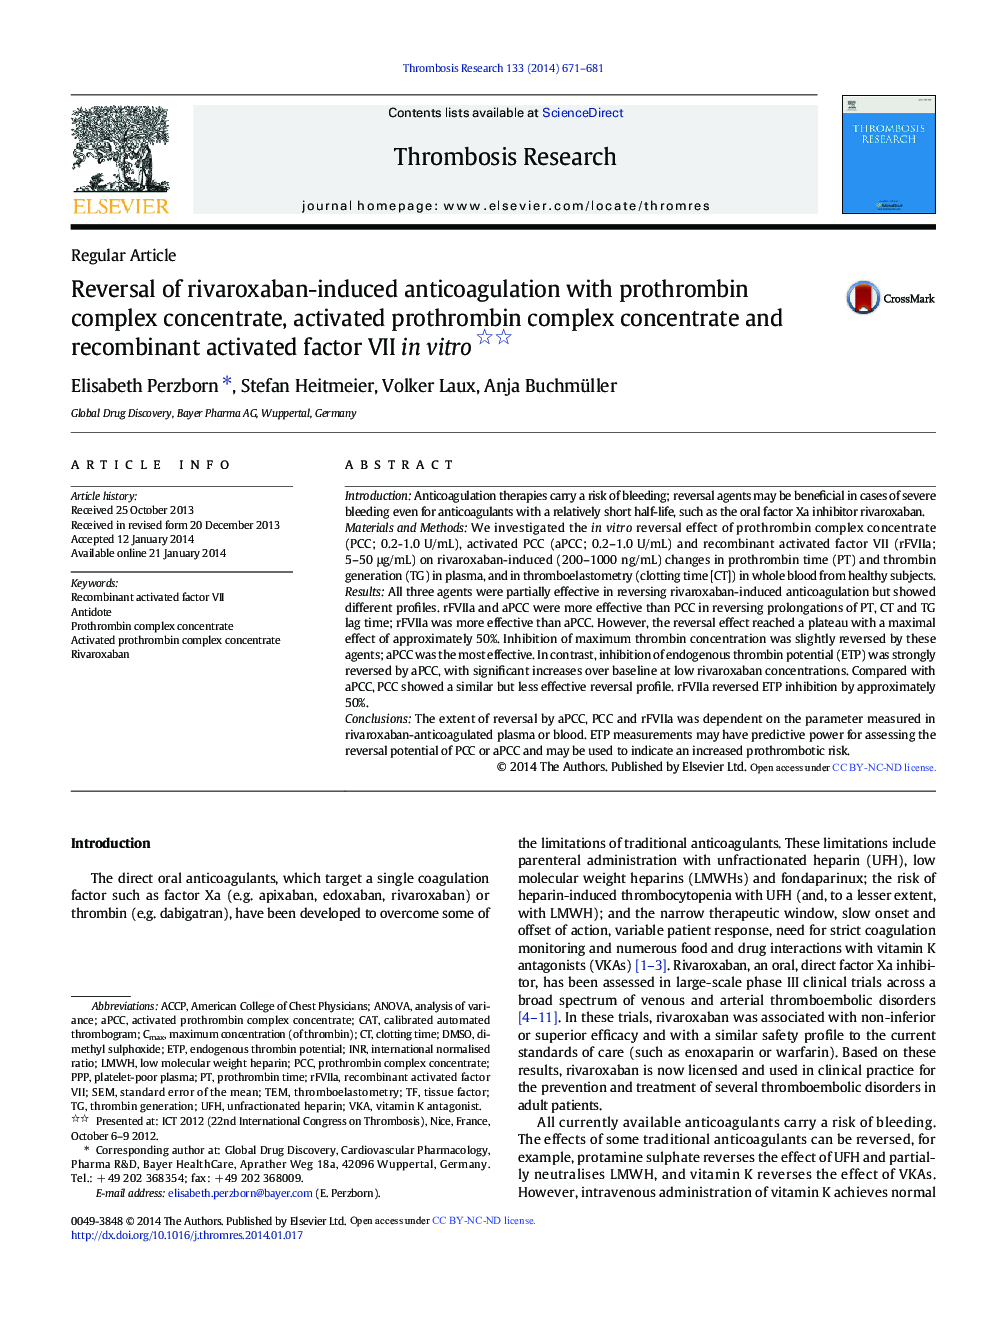 Reversal of rivaroxaban-induced anticoagulation with prothrombin complex concentrate, activated prothrombin complex concentrate and recombinant activated factor VII in vitro